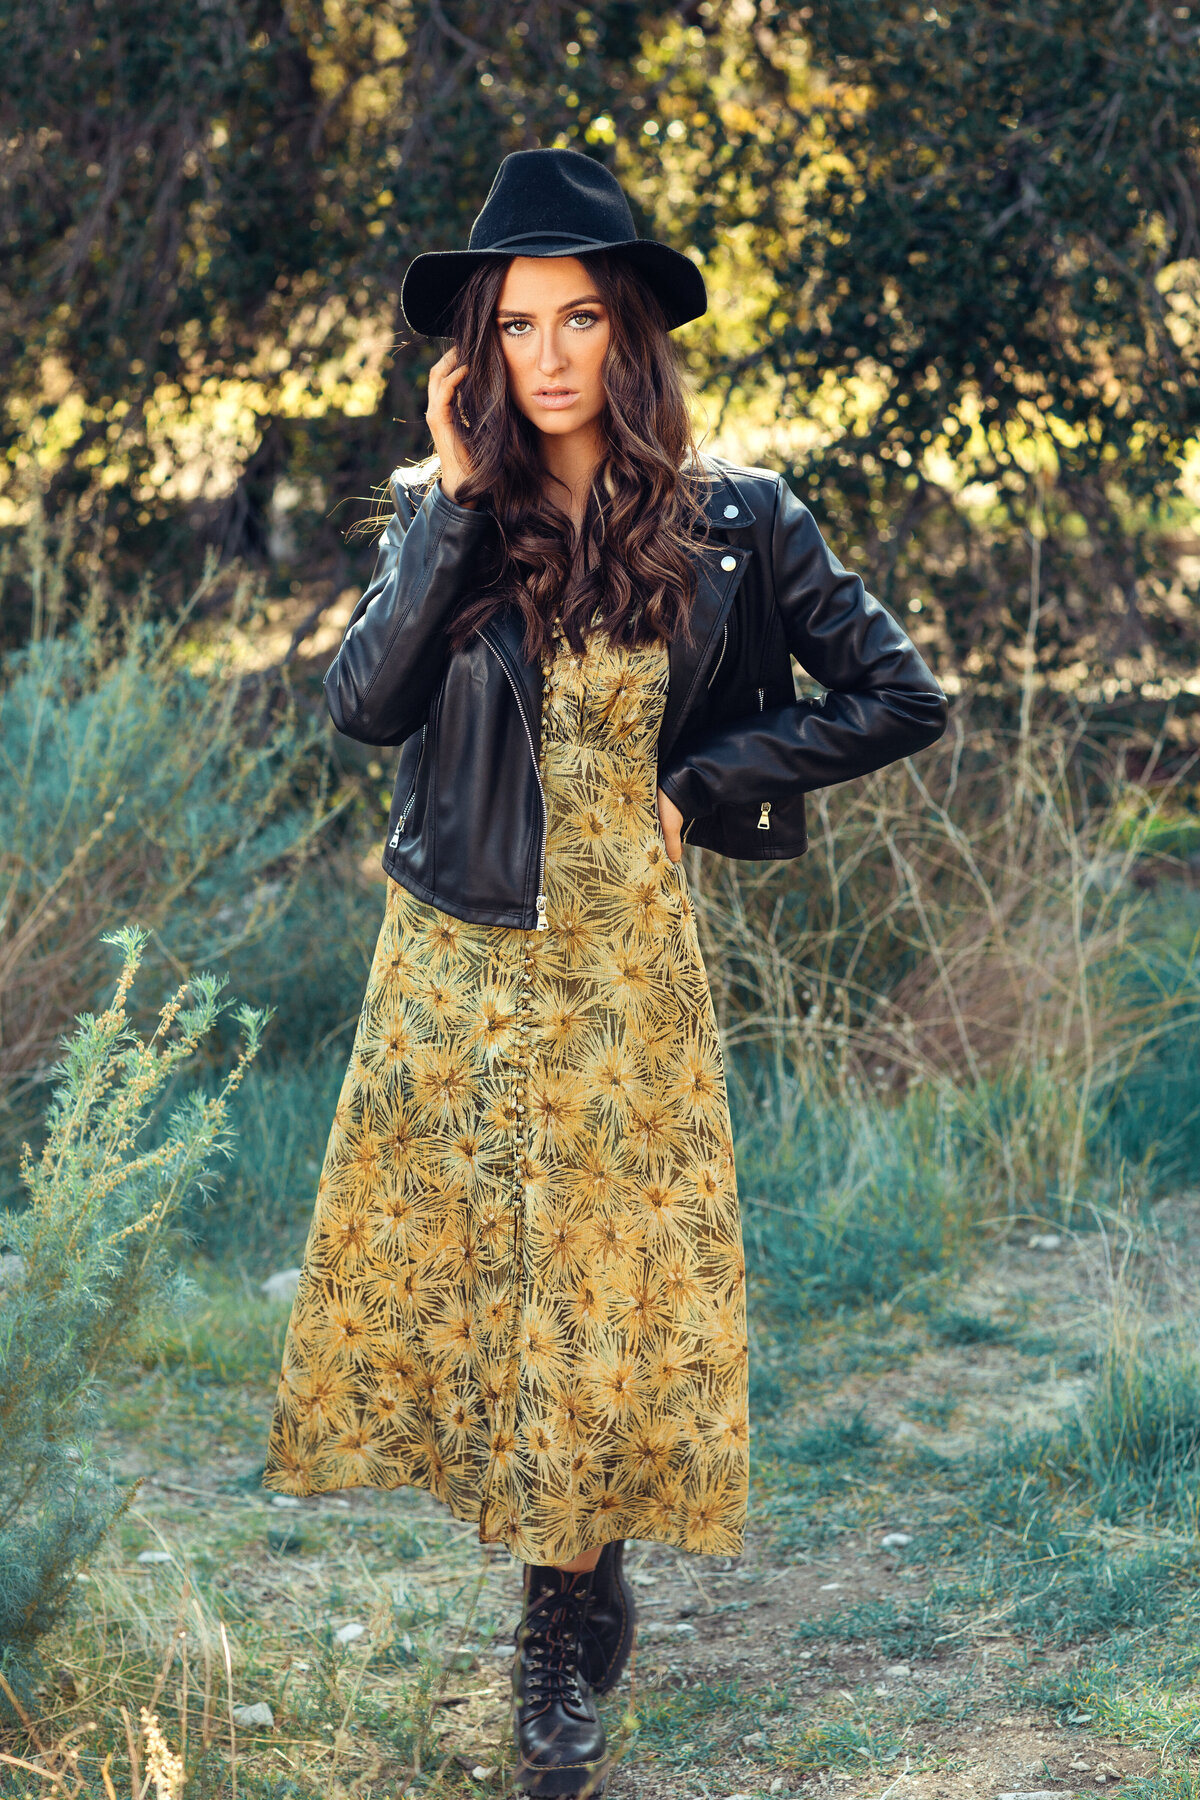 Portrait Photo Of Young Woman  Yellow Floral Dress Los Angeles